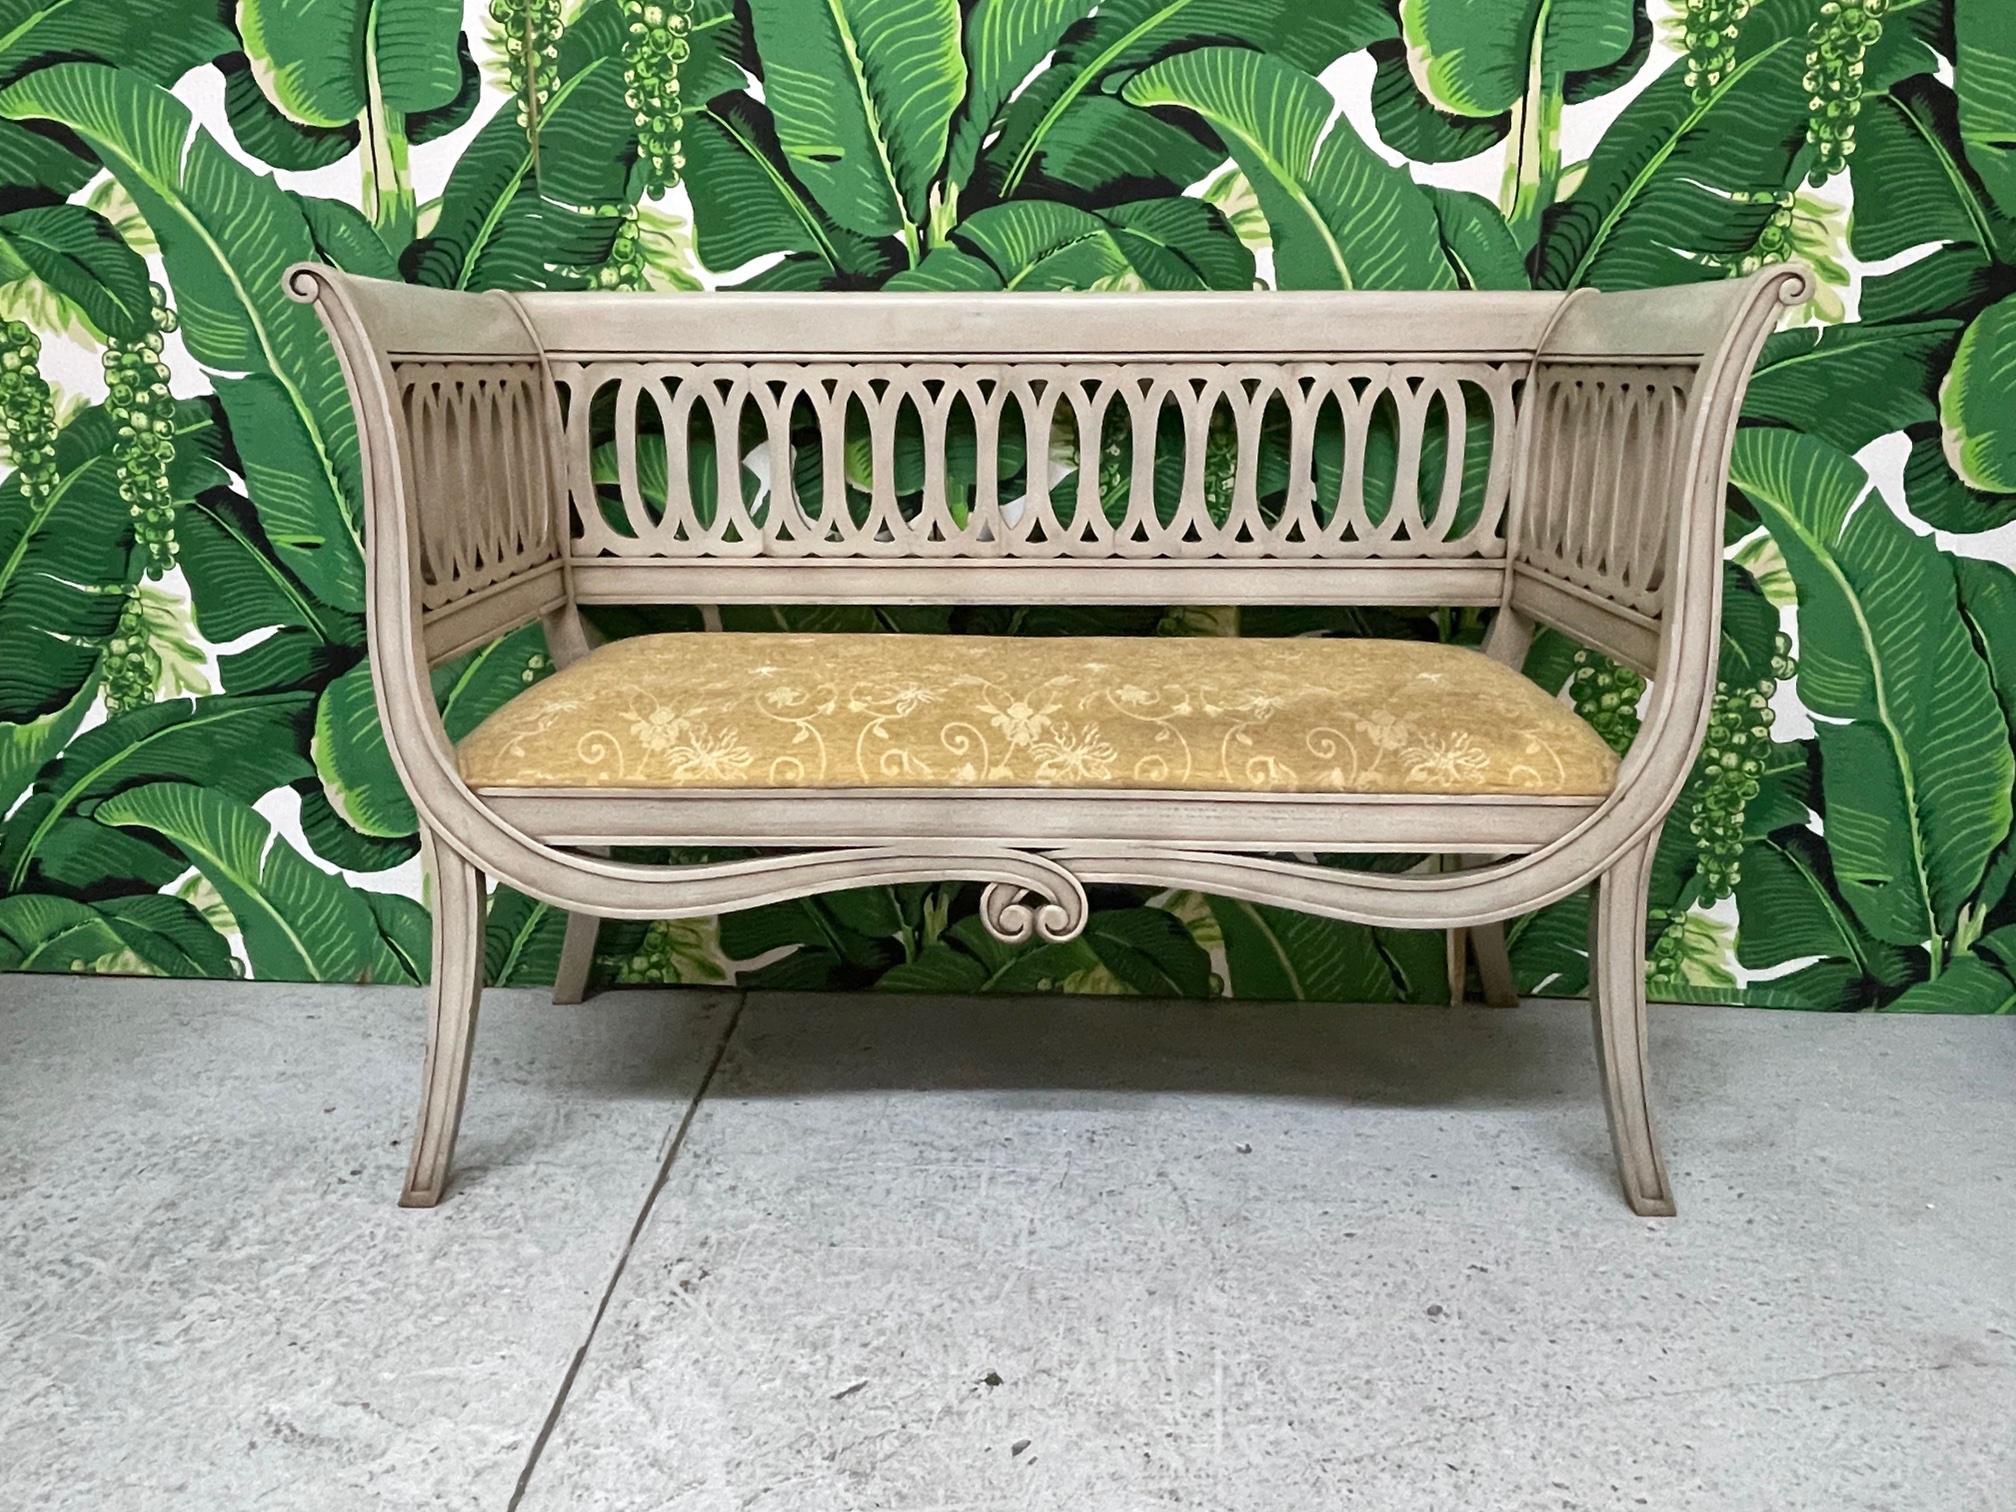 Regency style bench features a scrolled frame and sabre legs. Upholstered in a vintage tone on tone fabric. Finish appears to be original. Good condition with minor imperfections consistent with age.

 